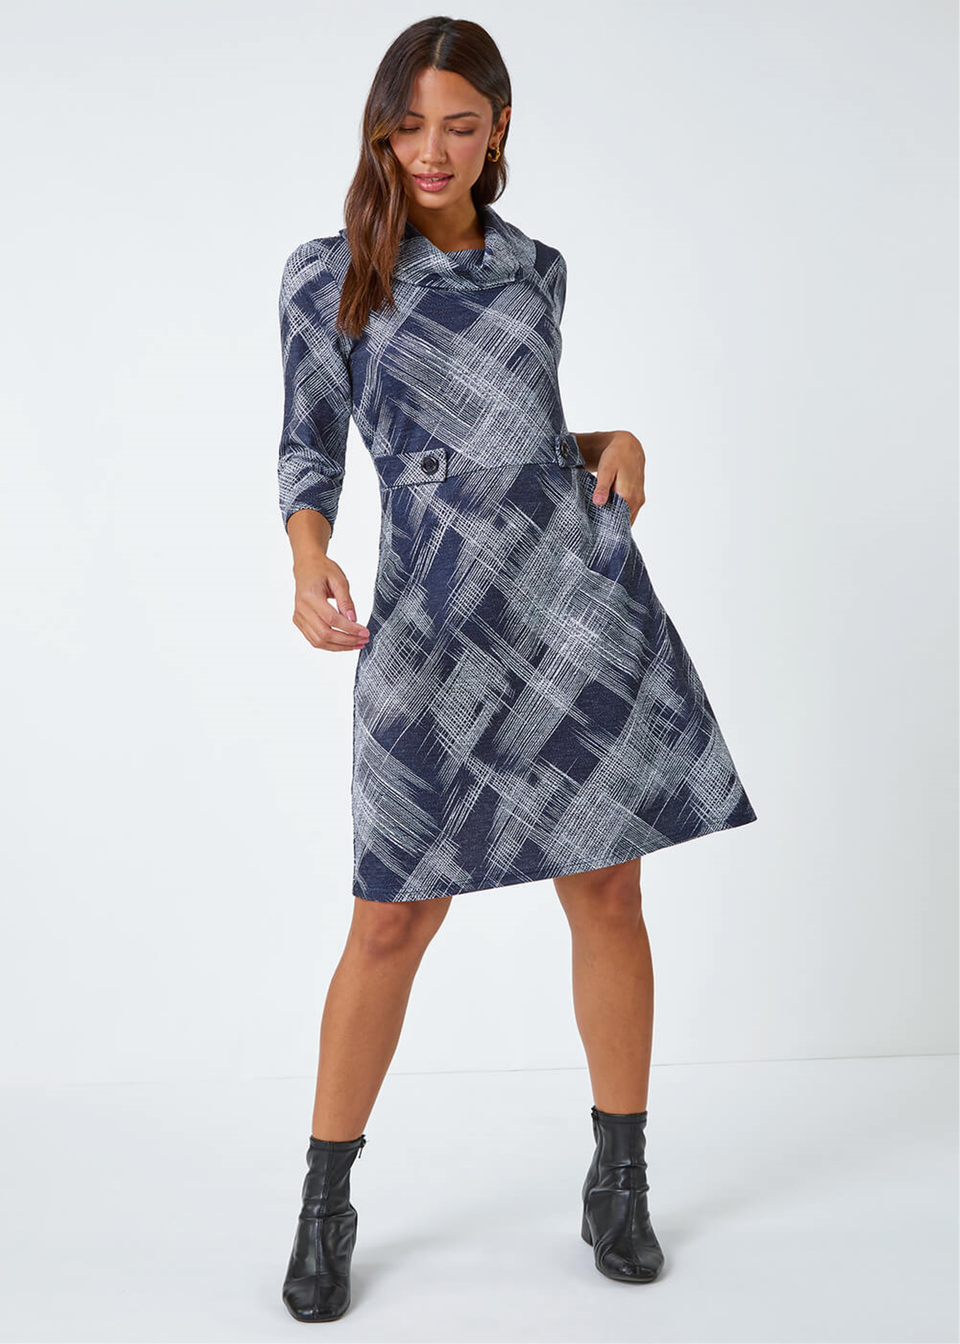 Roman Navy Abstract Cowl Neck Stretch Dress